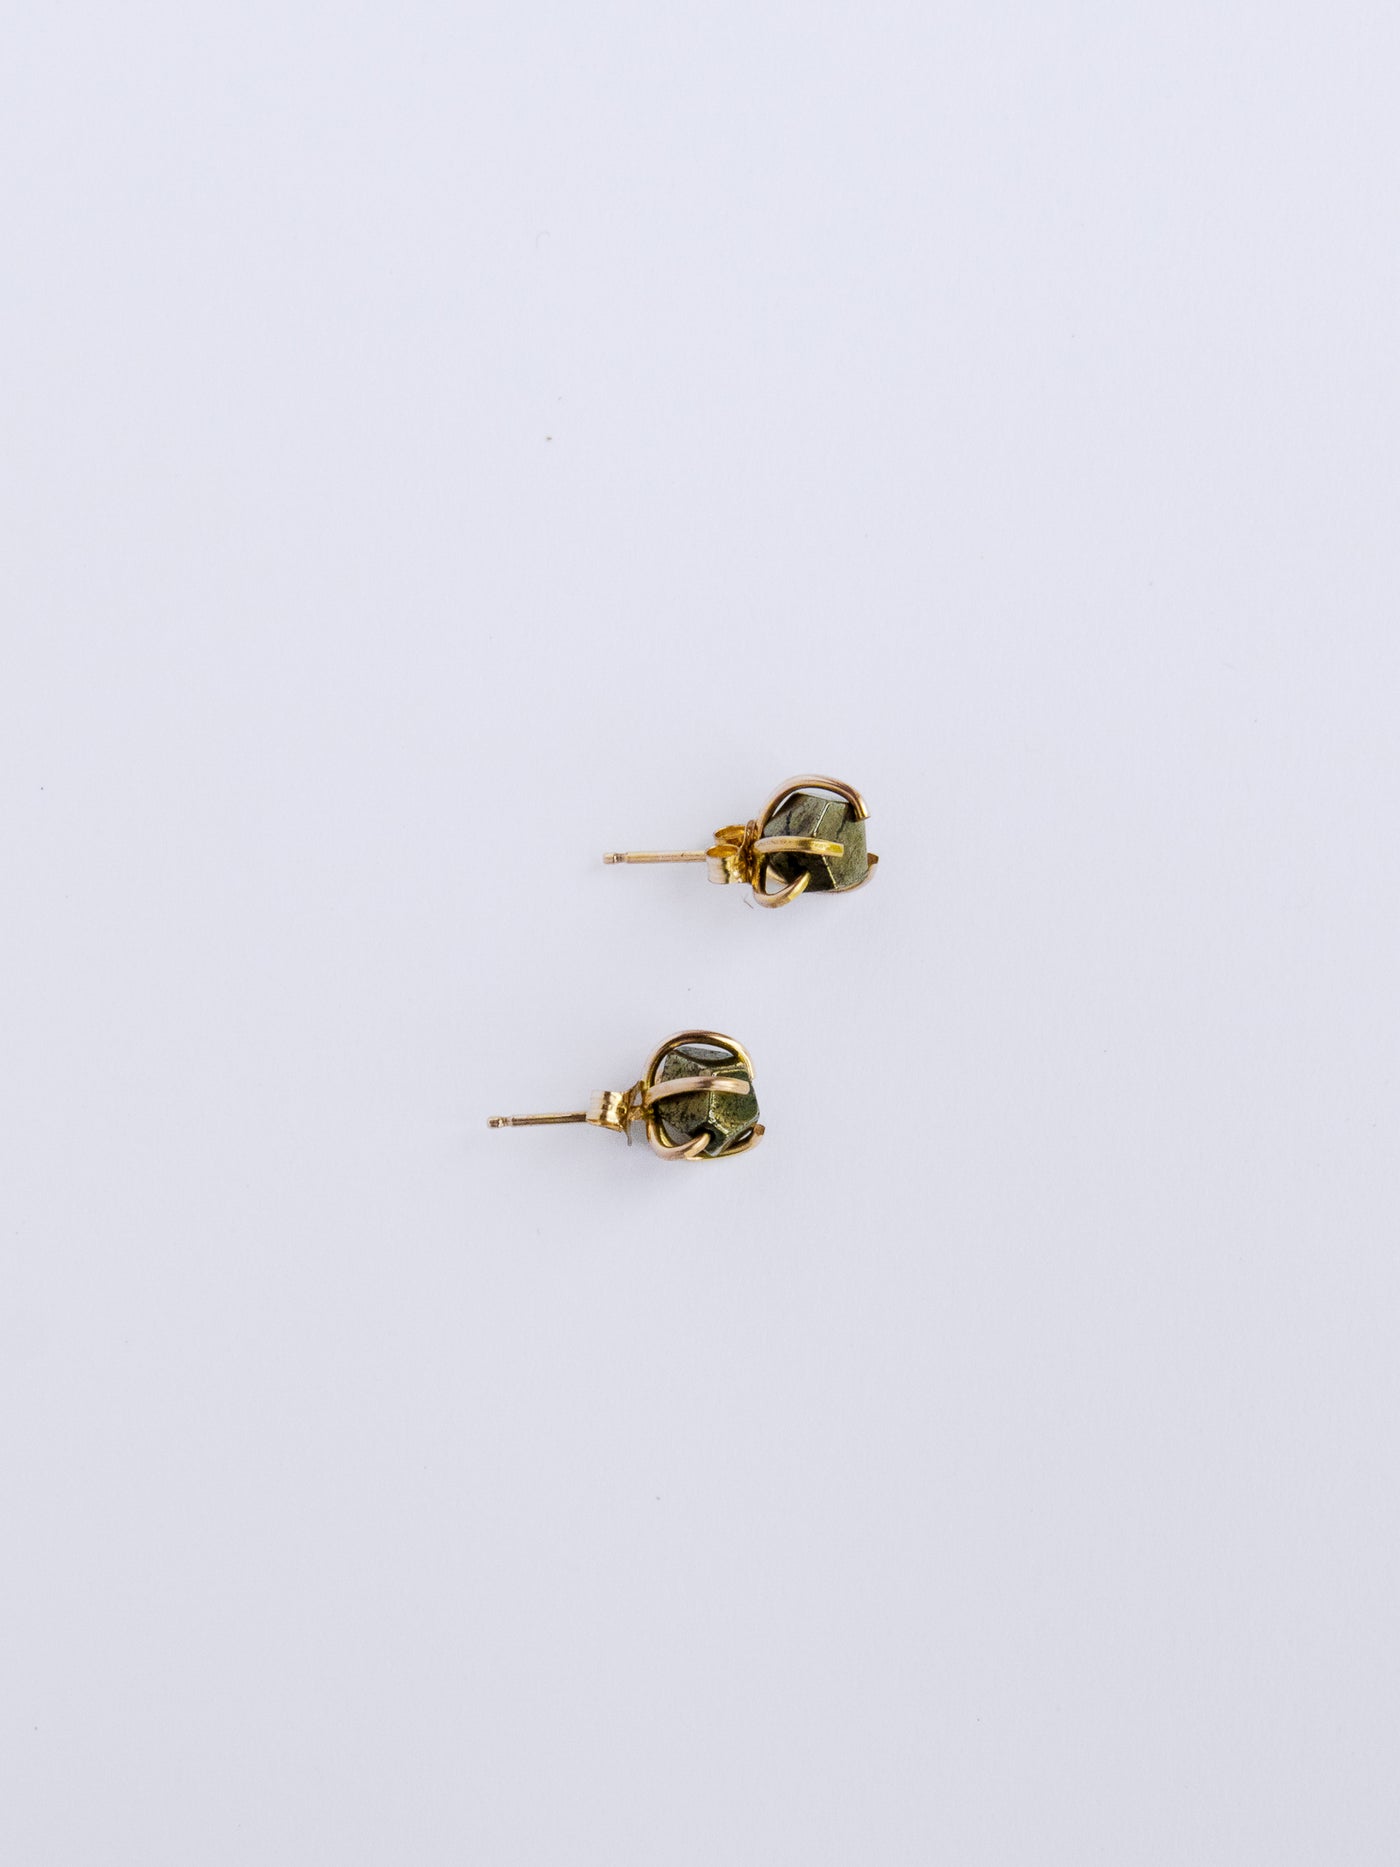 Pyrite Gold Prong Stud Earrings set in 5 handmade 14k yellow gold filled prongs.